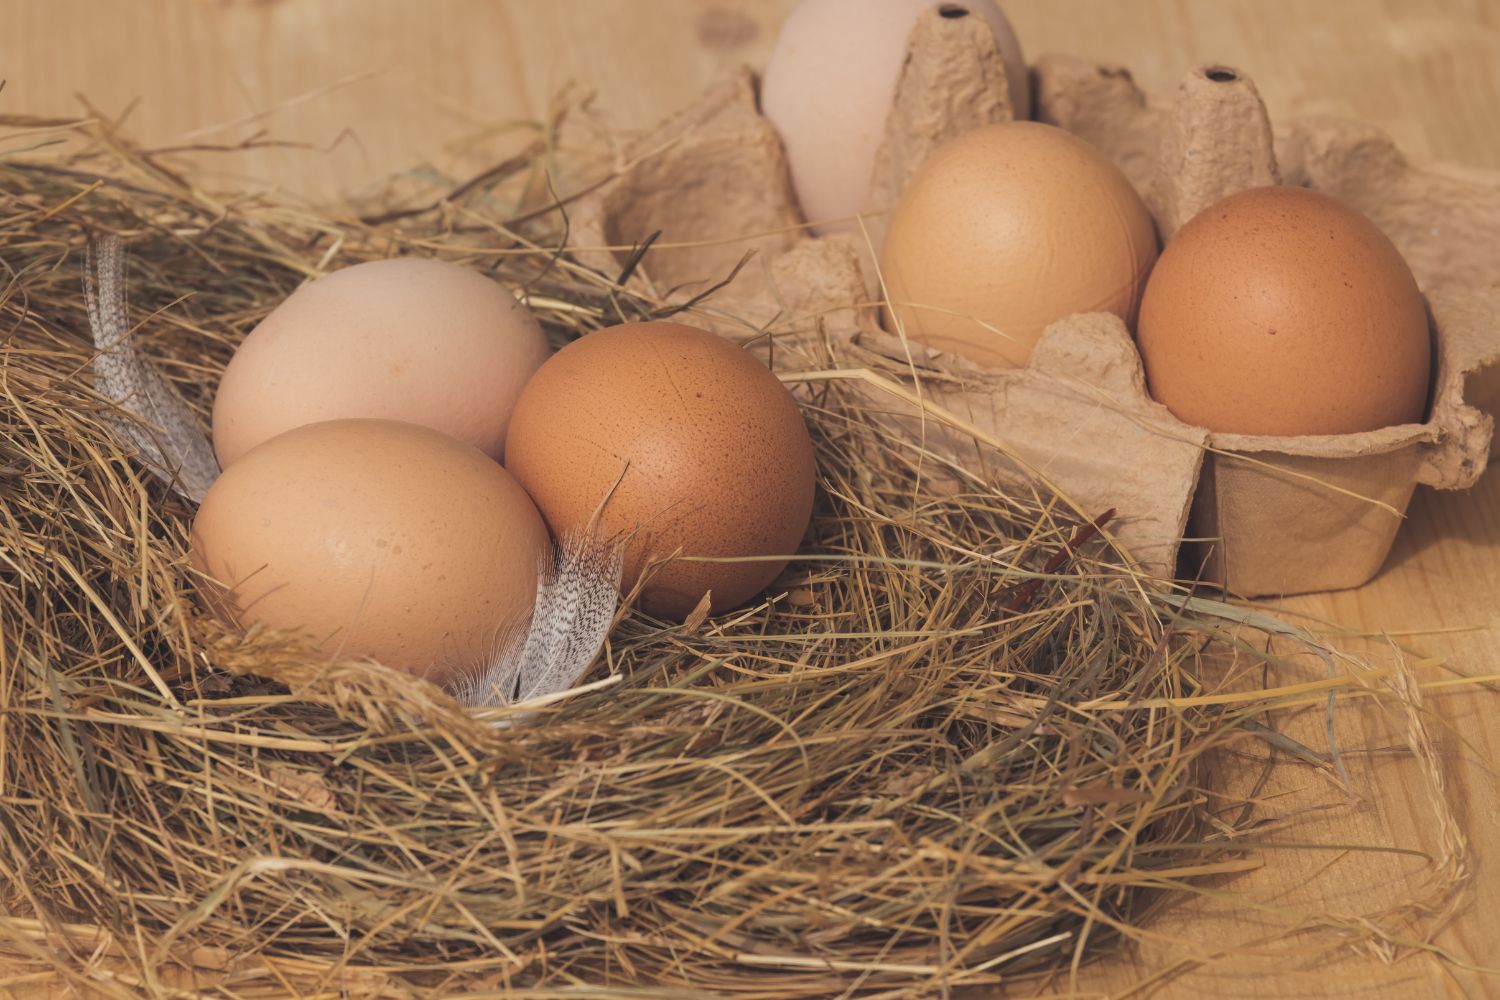 5 Ways To Increase Your Chickens' Egg Size